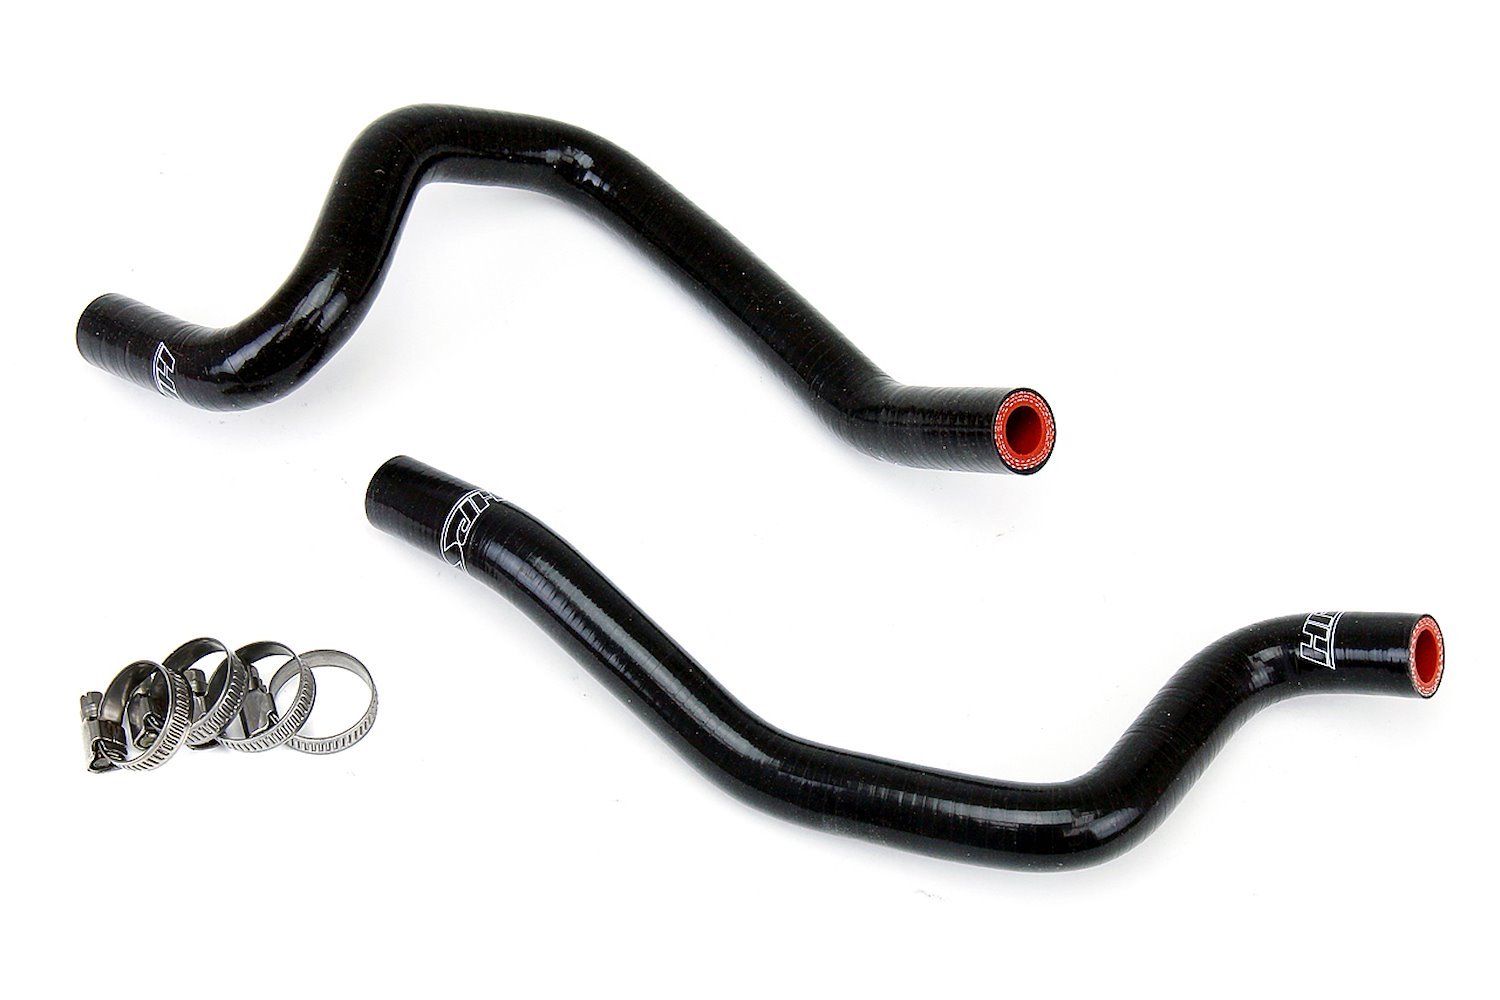 57-1802-BLK Heater Hose Kit, 3-Ply Reinforced Silicone, Replace OEM Rubber Heater Coolant Hoses